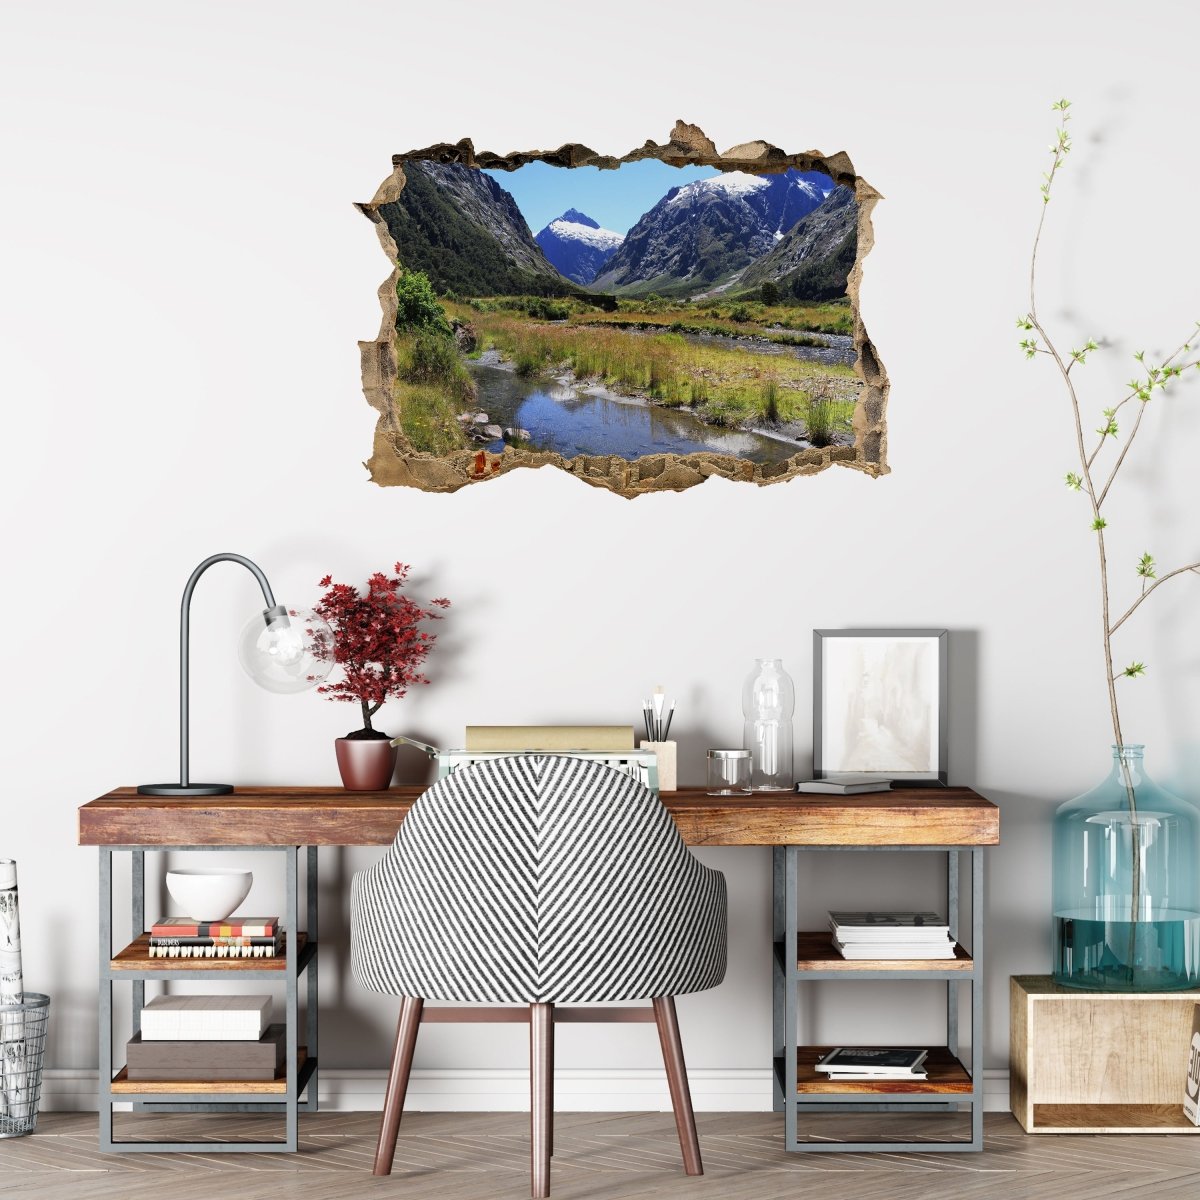 Sticker mural 3D fjord paysage nature - Wall Decal M0214